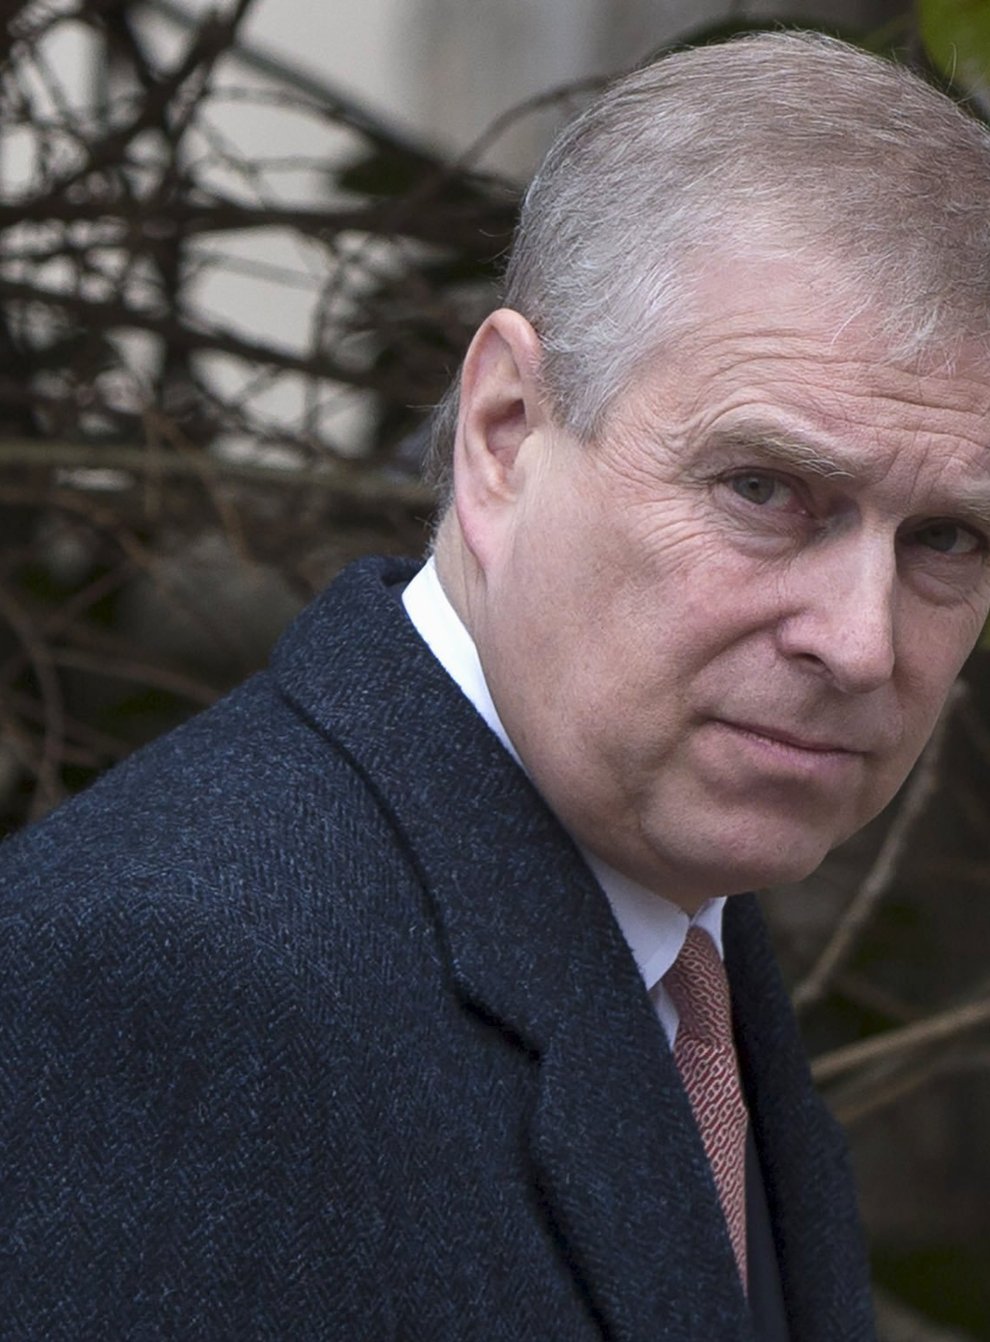 File photo dated 05/04/15 of the Duke of York. Lawyers for the woman suing the Duke over sexual assault allegations have claimed to have served legal papers on him, according to a document filed in a New York court. The legal counsel, who represent Virginia Giuffre, say in the document that the civil lawsuit was handed to a Metropolitan Police officer who was on duty at the main gates of The Royal Lodge, Windsor Great Park, on August 27 at 9.30am. Issue date: Saturday September 11, 2021.